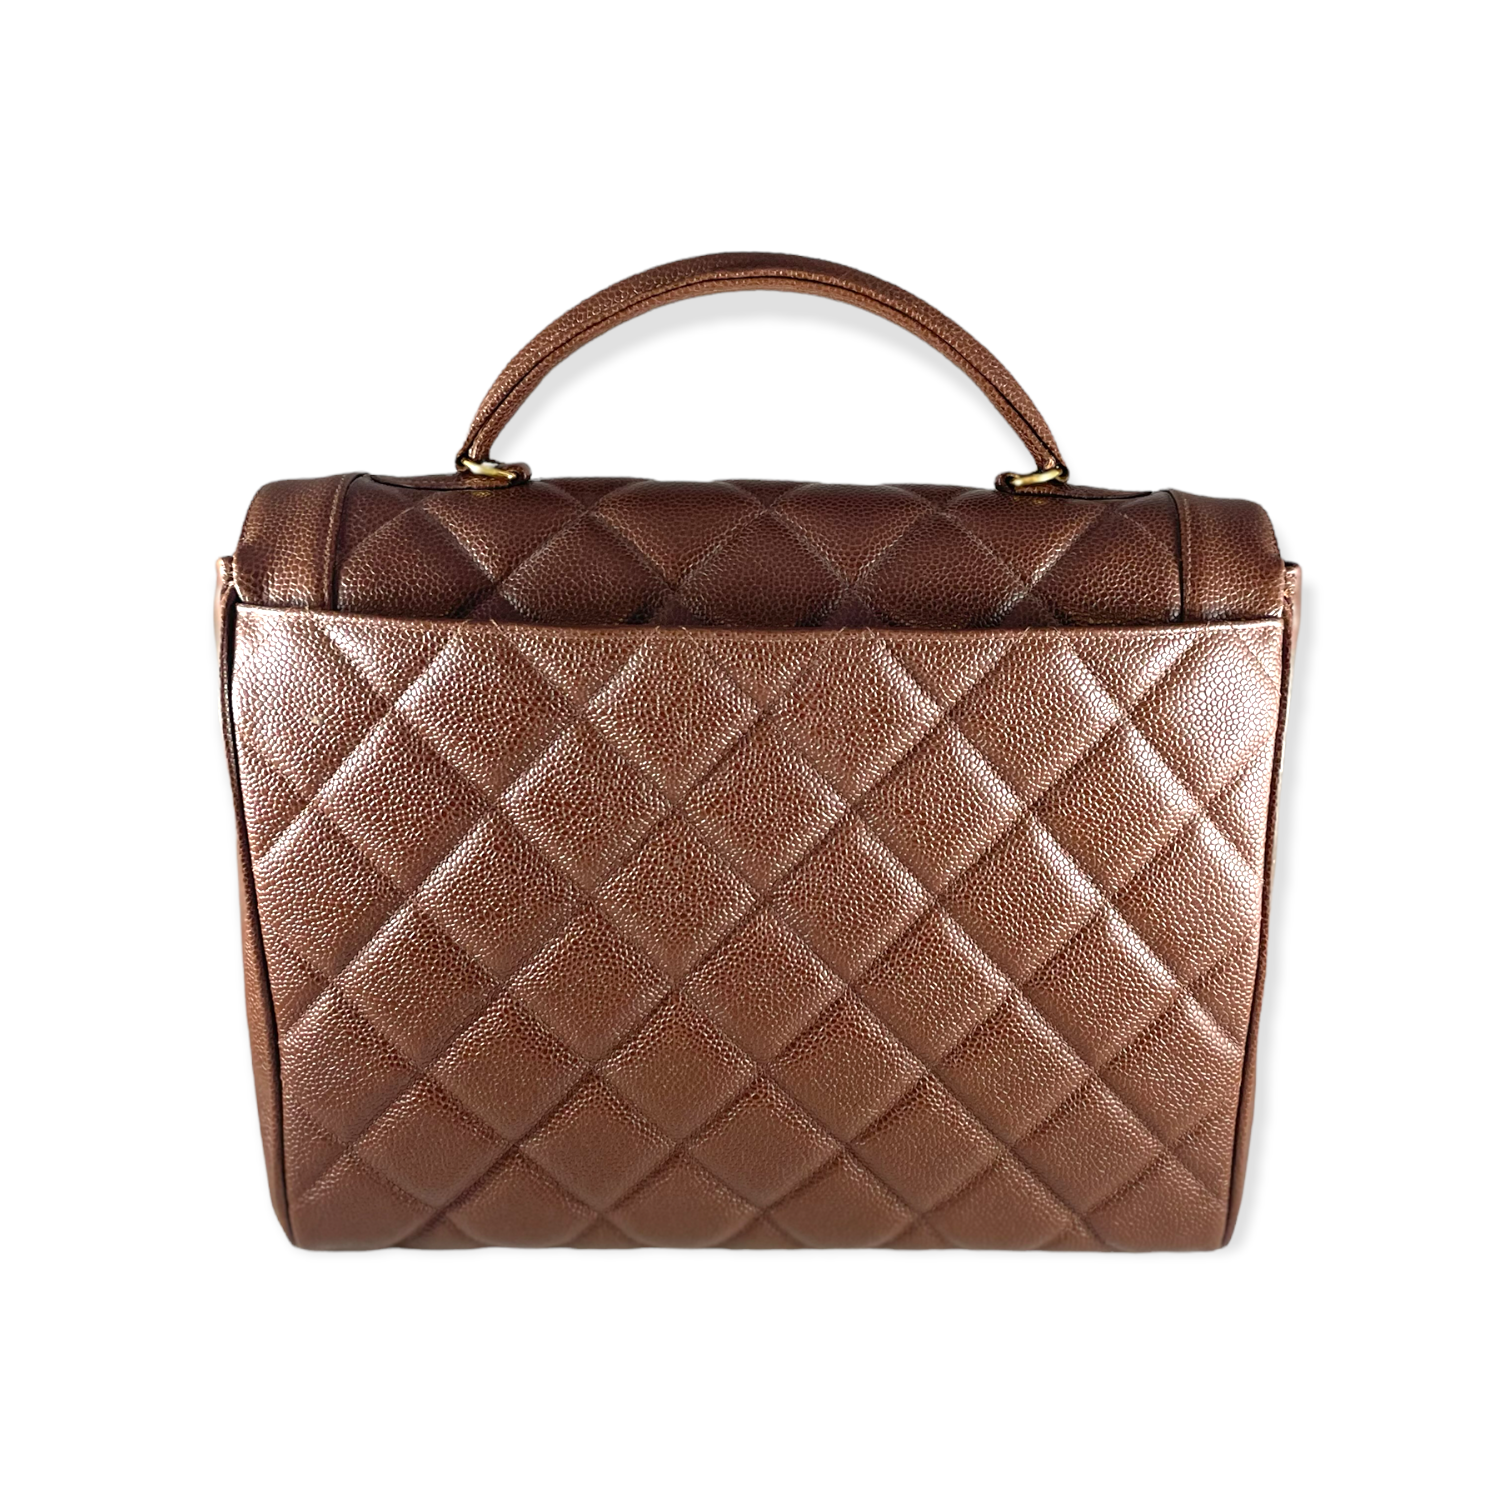 Vintage Chanel Brown Caviar Quilted Leather Handbag